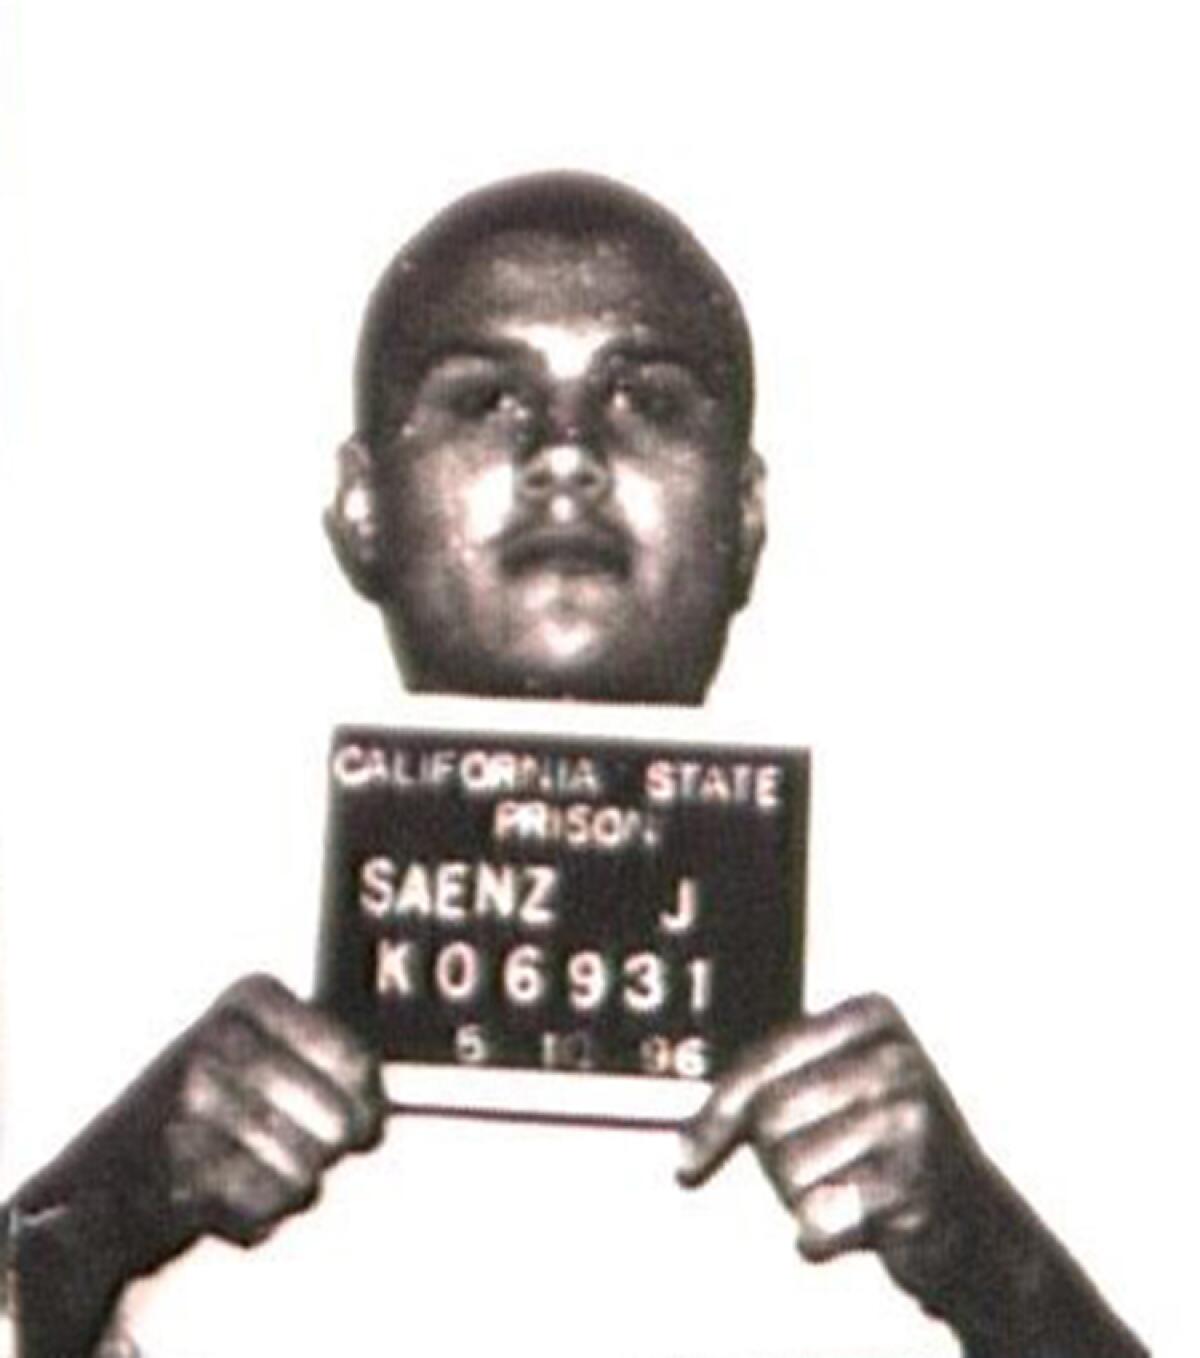 A black-and-white mugshot of Jose Saenz holding up his California State Prison identification number